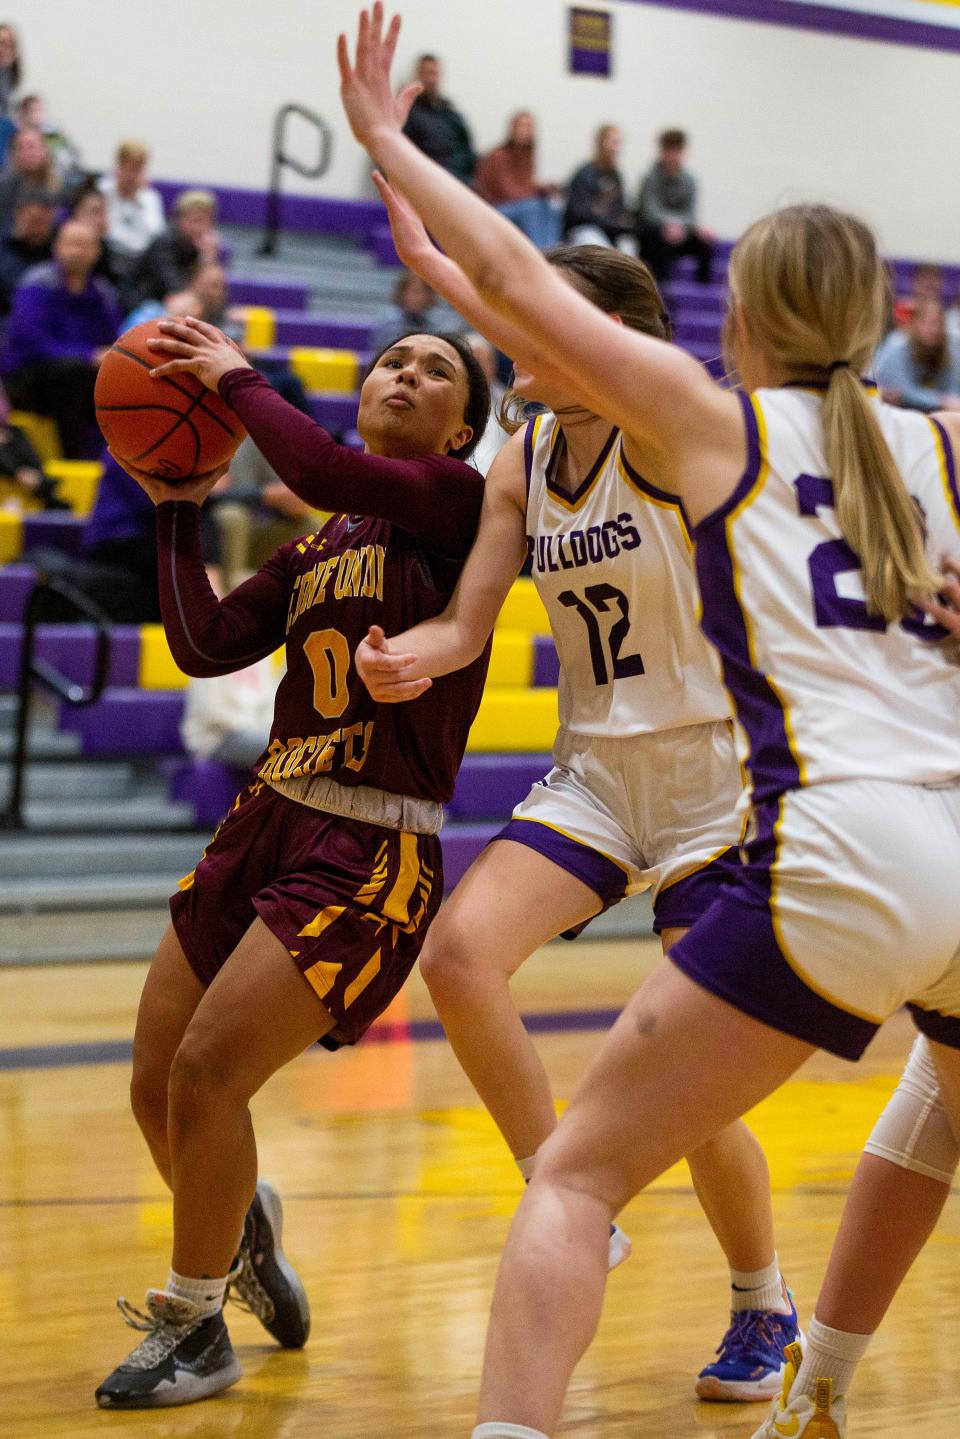 Berne Union's Abbe Evans (0) tries to fight an opening for a shot against Bloom-Carroll in girls varsity basketball action at Bloom-Carroll High School in Carroll, Ohio on January 20, 2022.